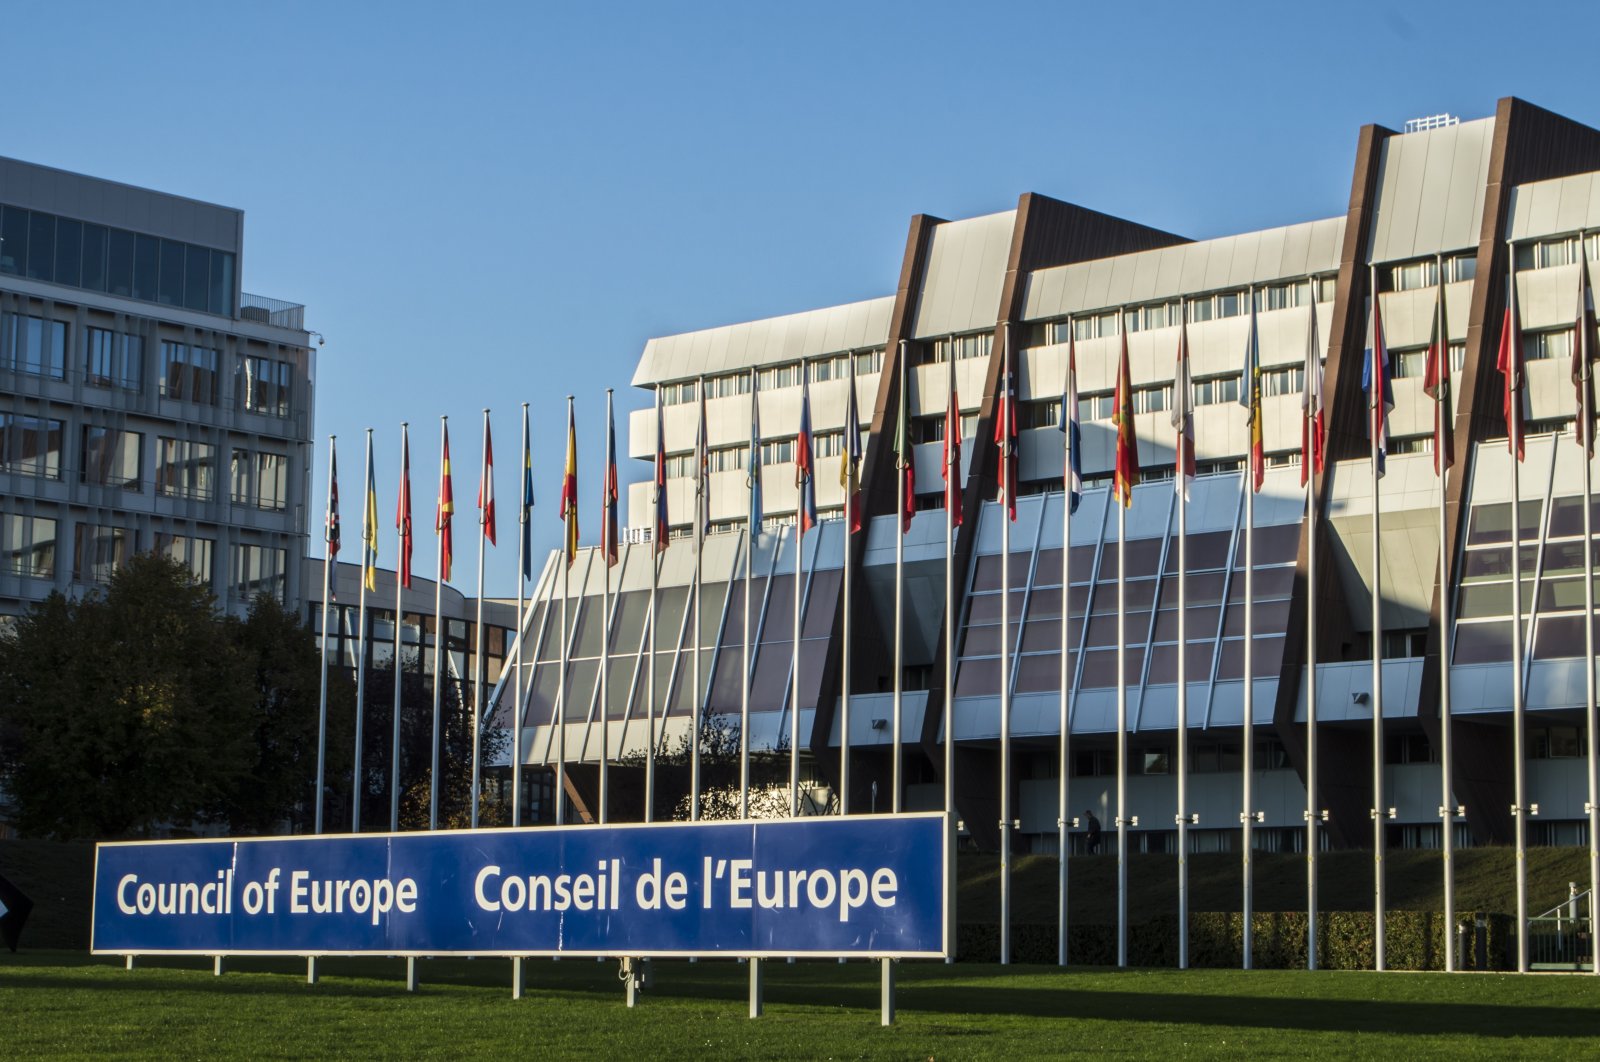 Council of Europe headquarters in Strasbourg, France in this undated file photo. (Shutterstock File Photo)